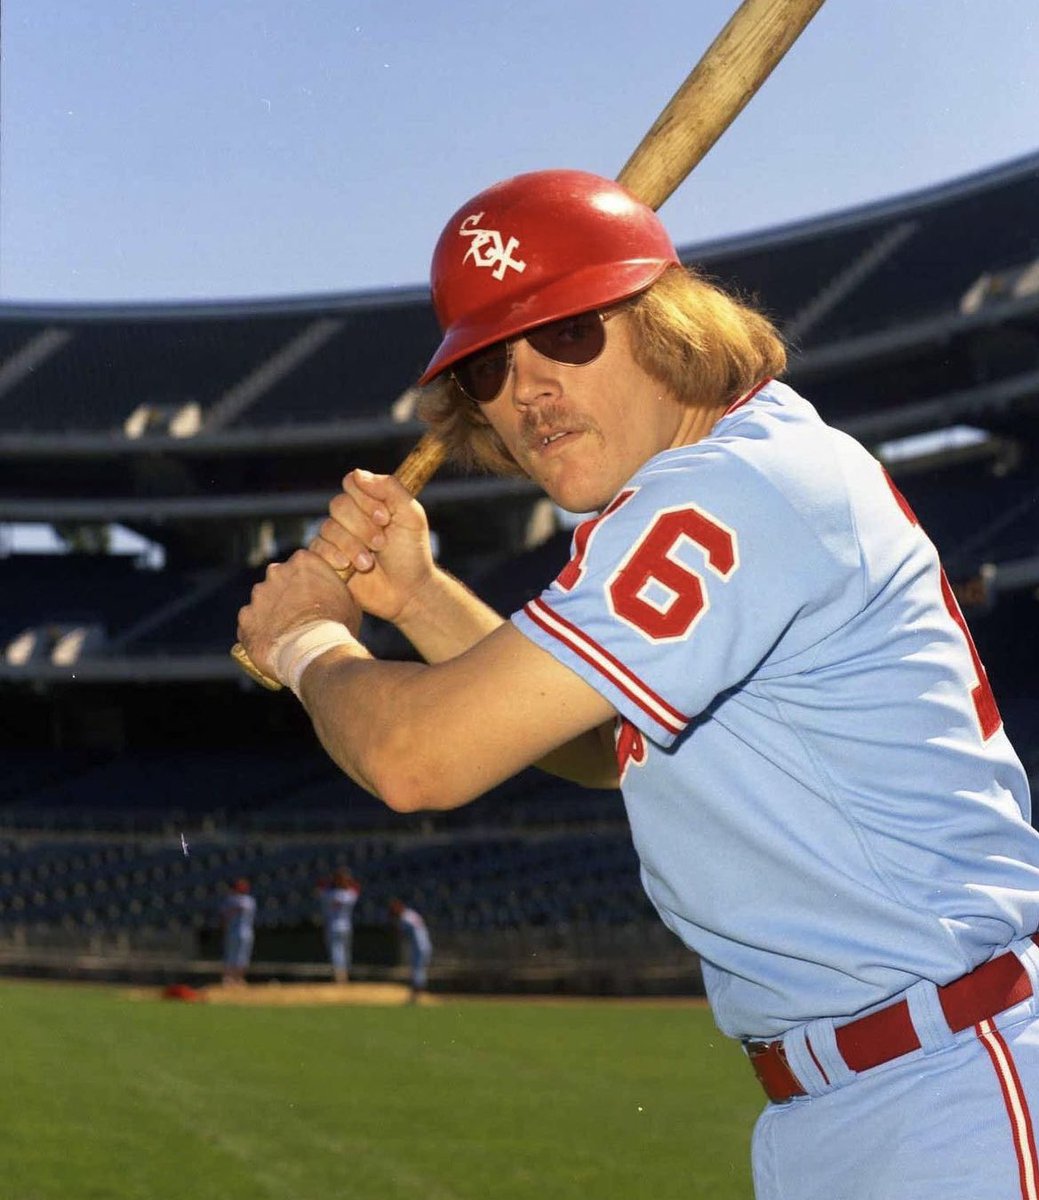 Who has or had the best hair in baseball? I’m going with Brian Downing. Please quote